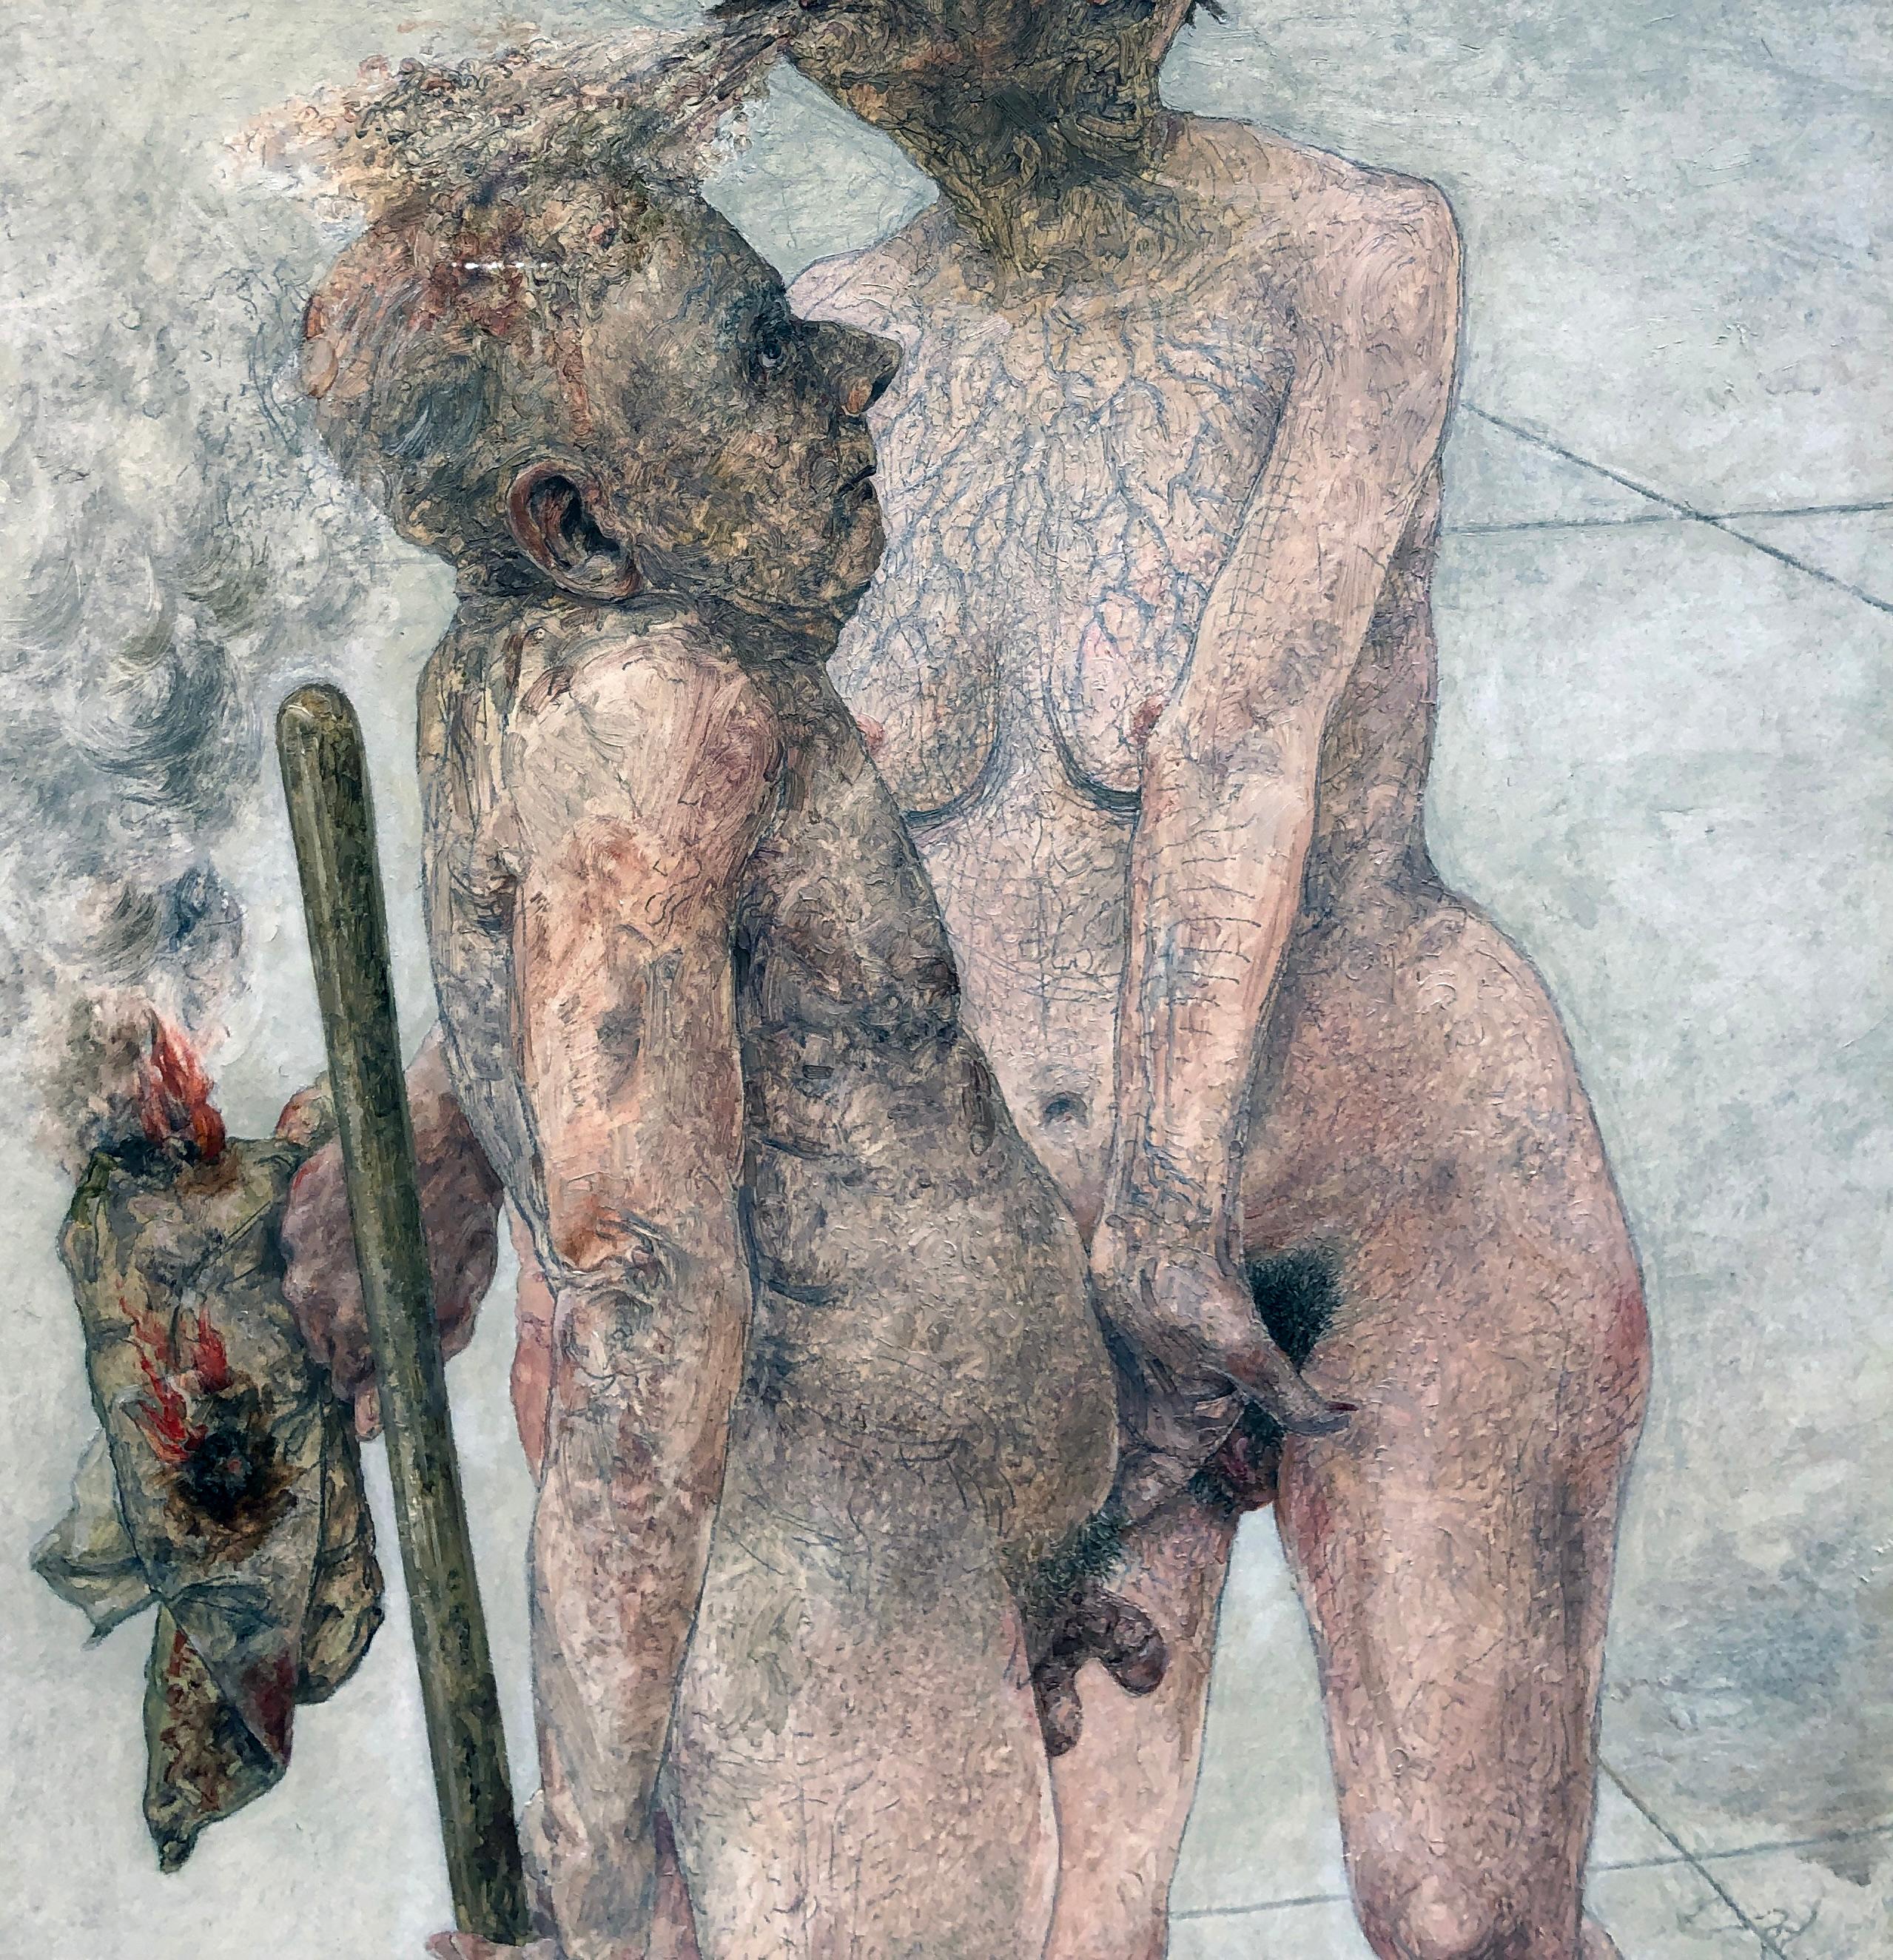 Gluttony, The Seven Deadly Sins Series, Nude Figures, Oil on Watercolor Paper - Brown Nude Painting by David Becker